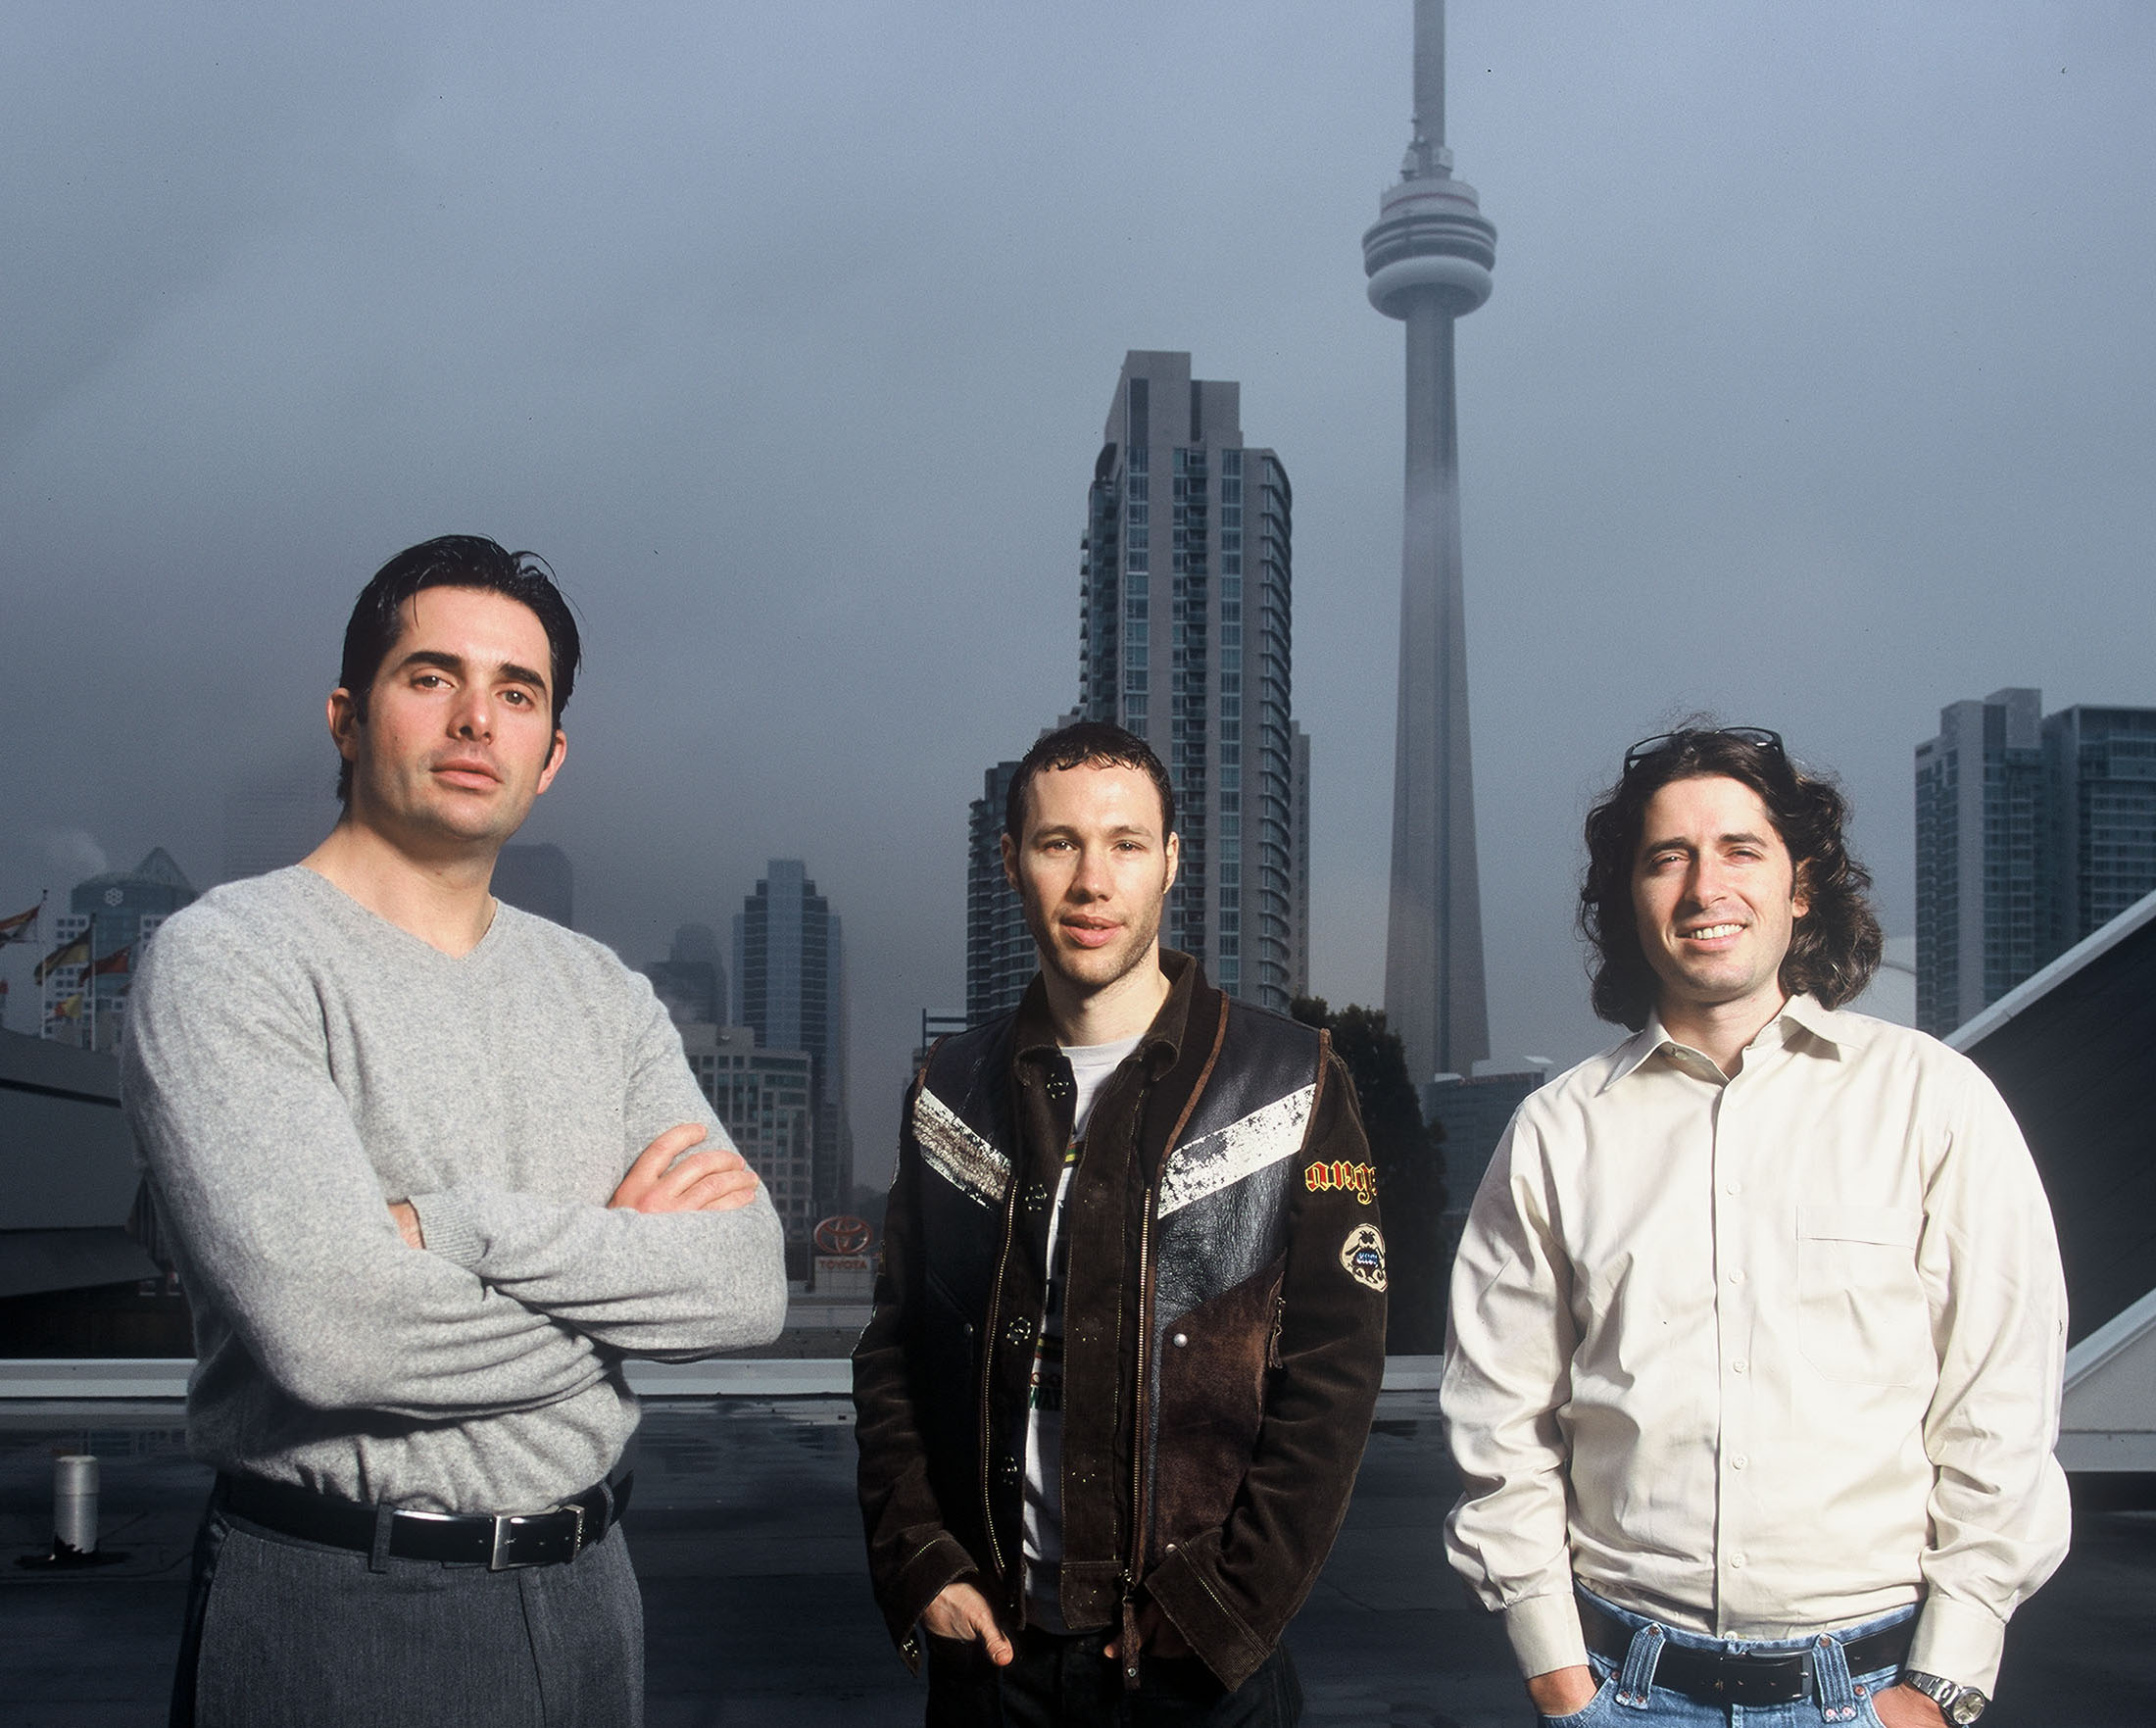 A photo of Spin Master's co-founders: Anton Rabie (left), Ronnen Harary (right), and Ben Varadi (middle)